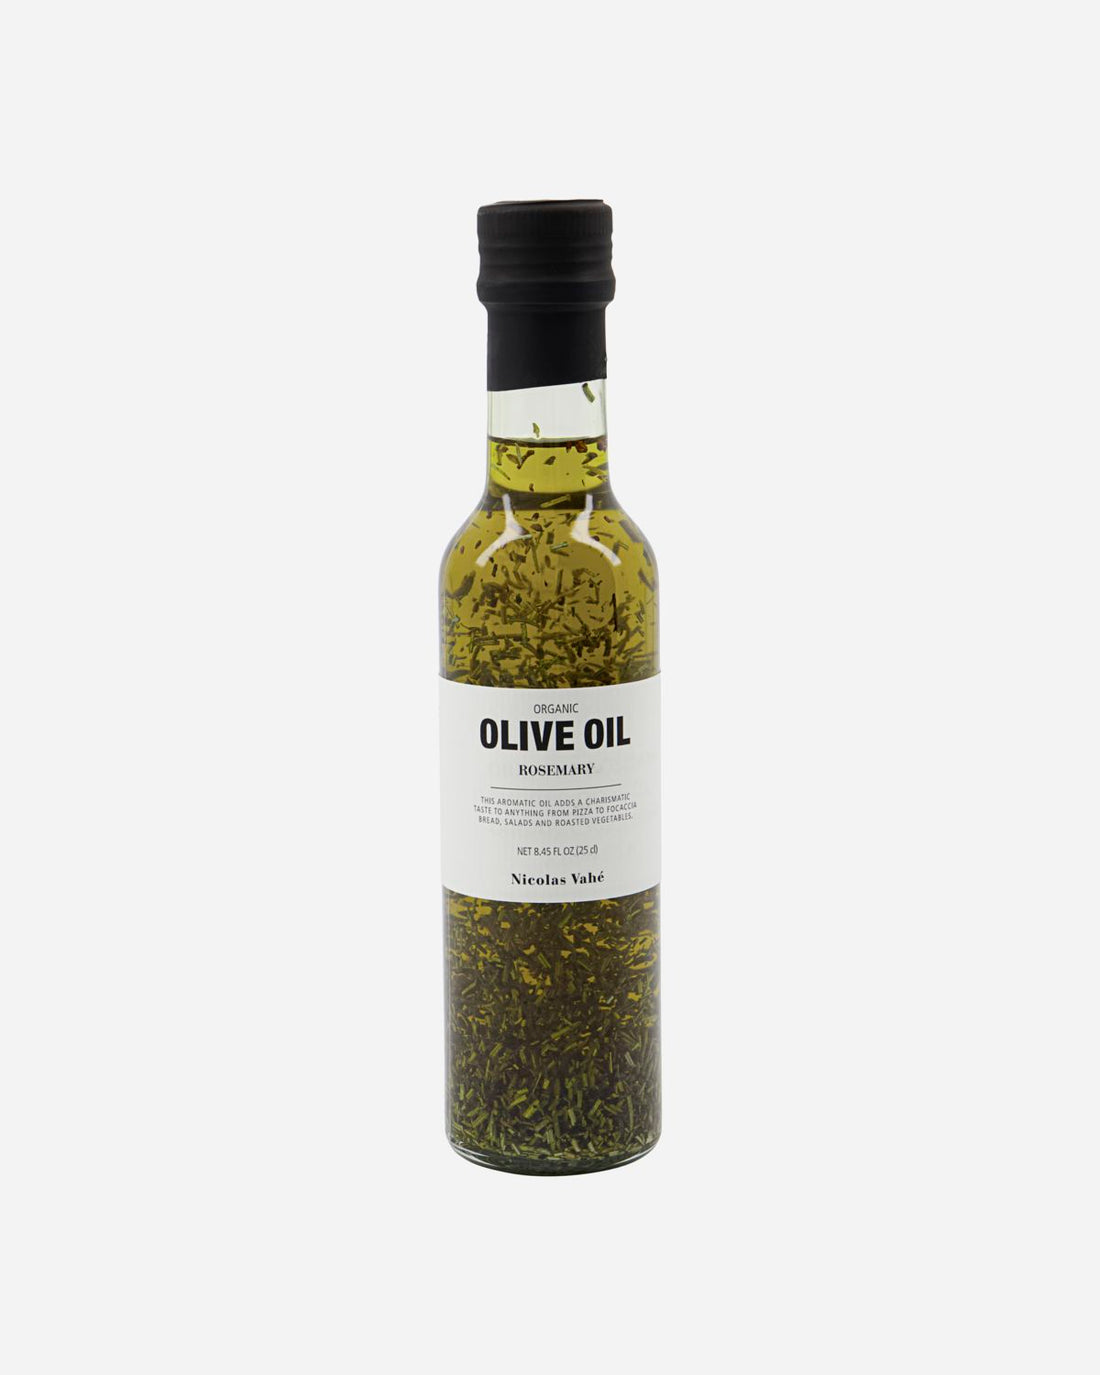 Organic olive oil with rosemary